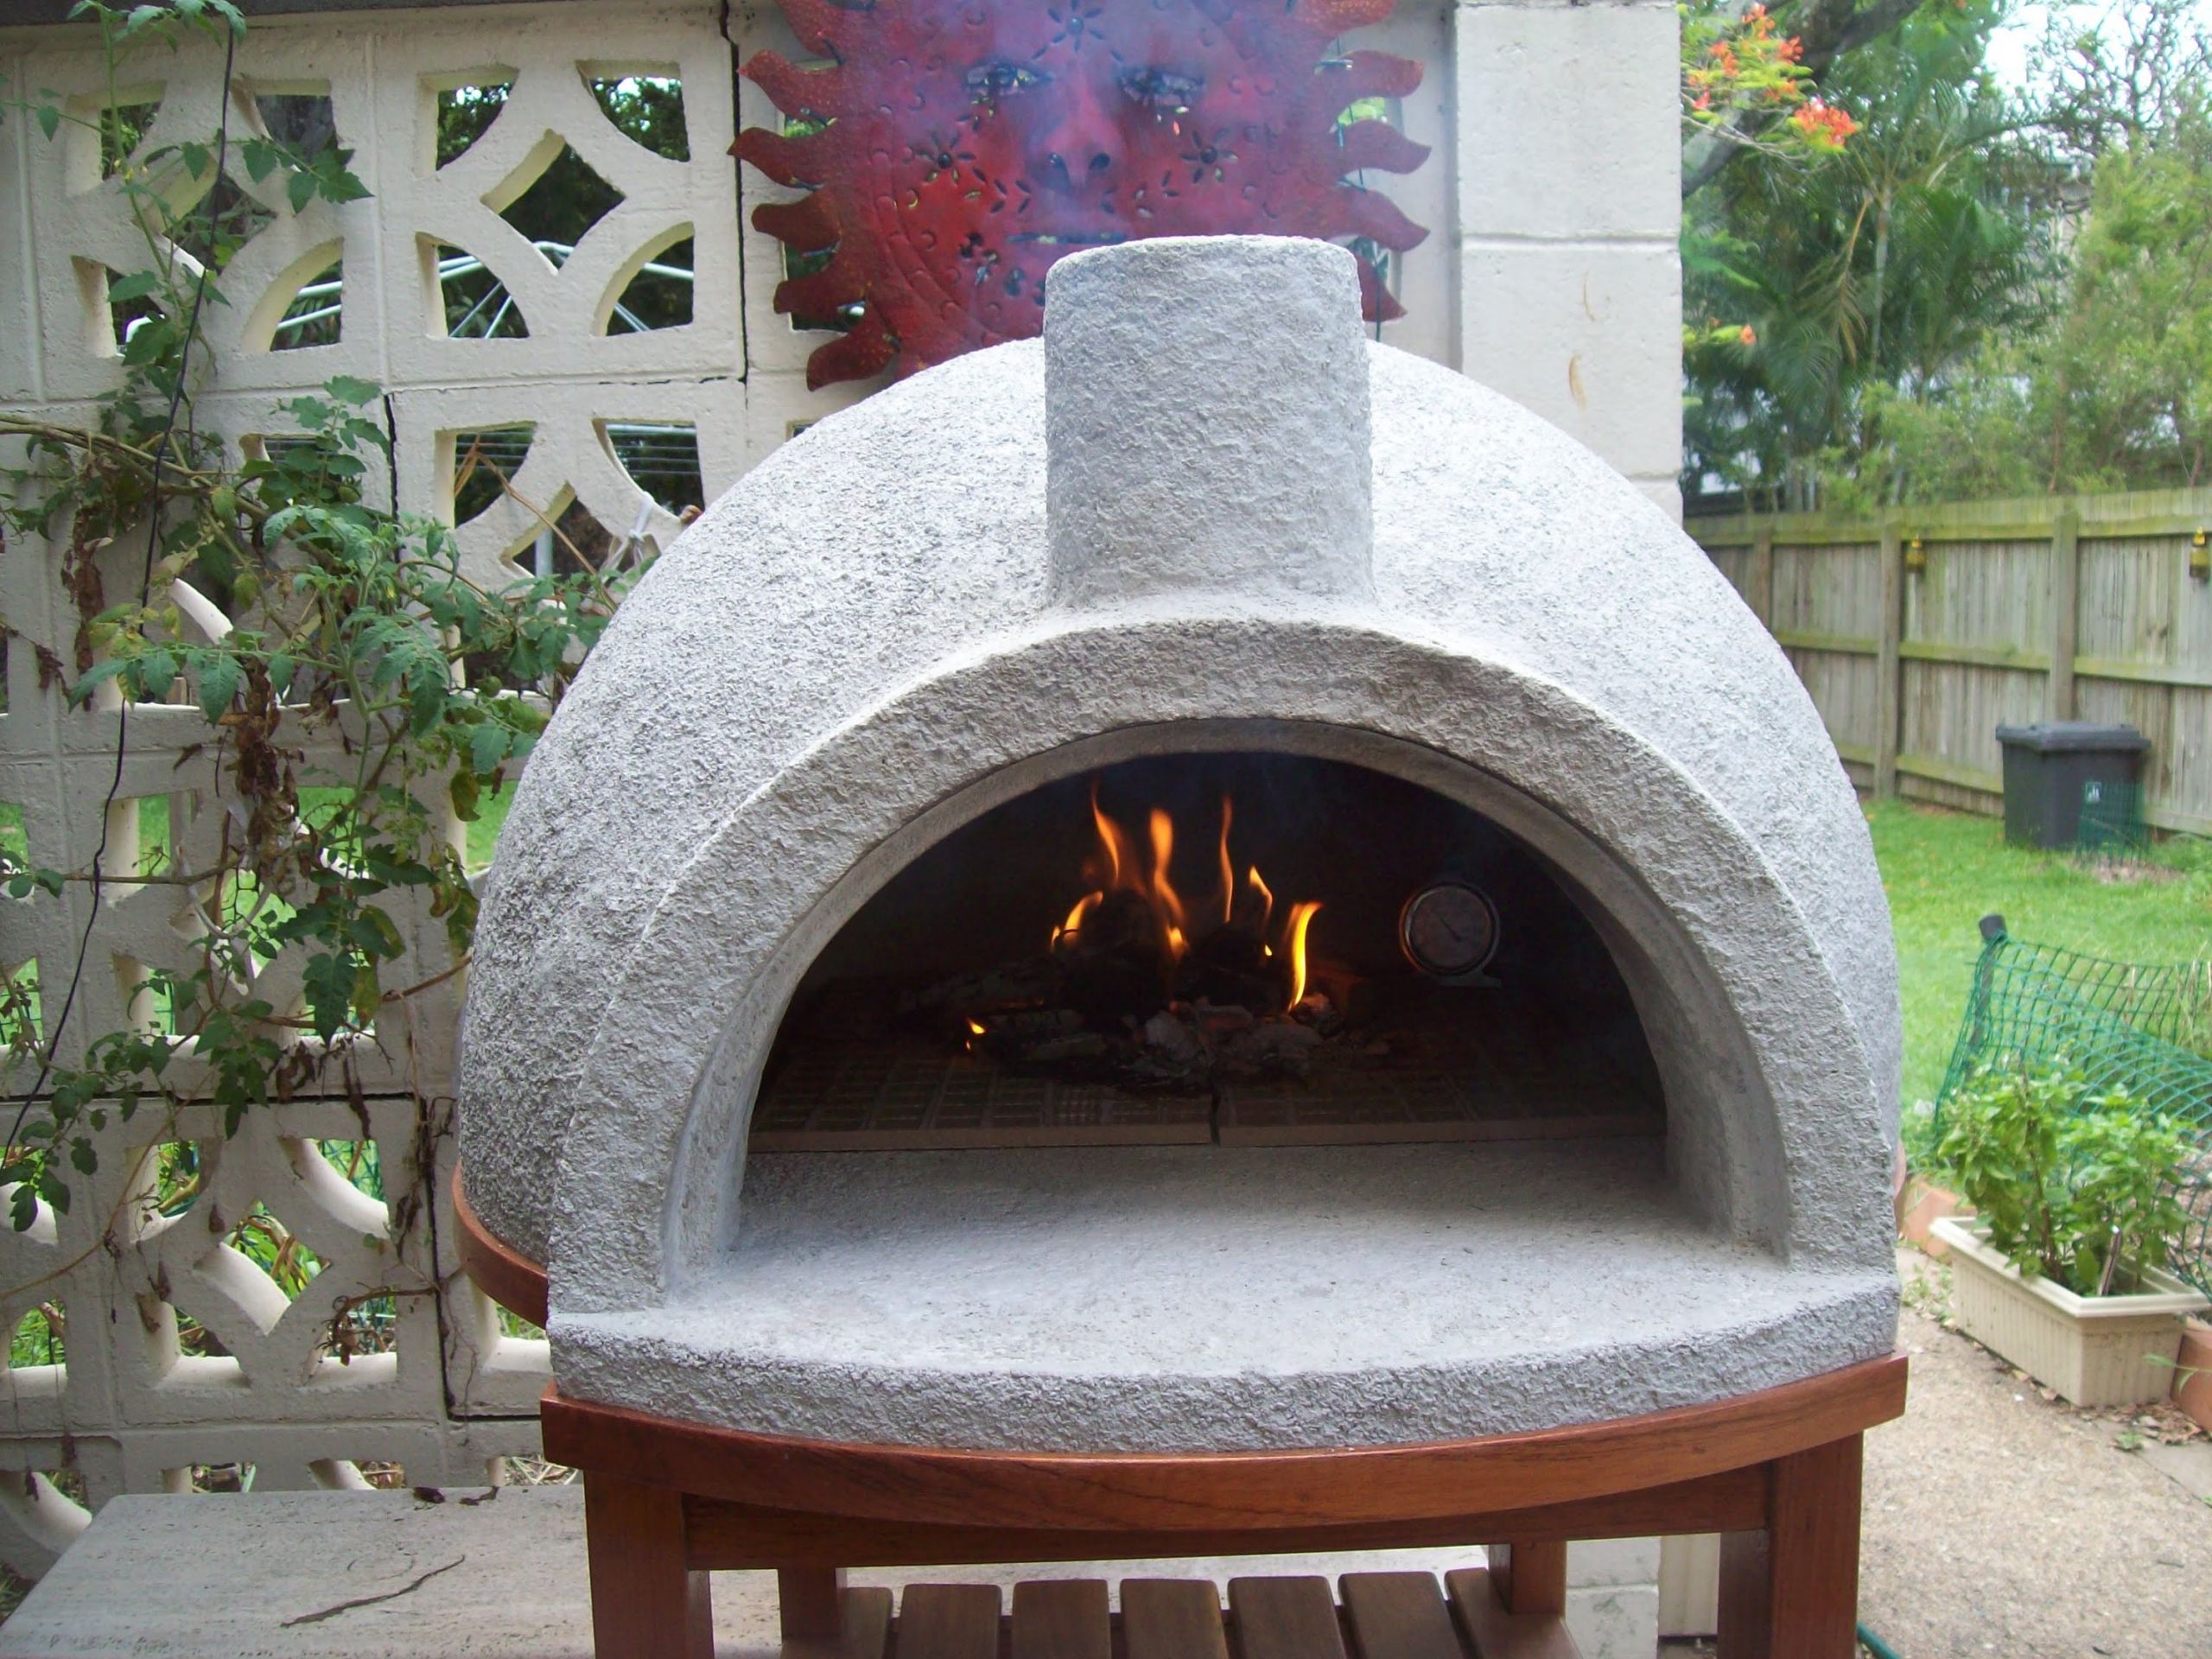 DIY Woodfired Pizza Oven
 vermiculite pizza oven